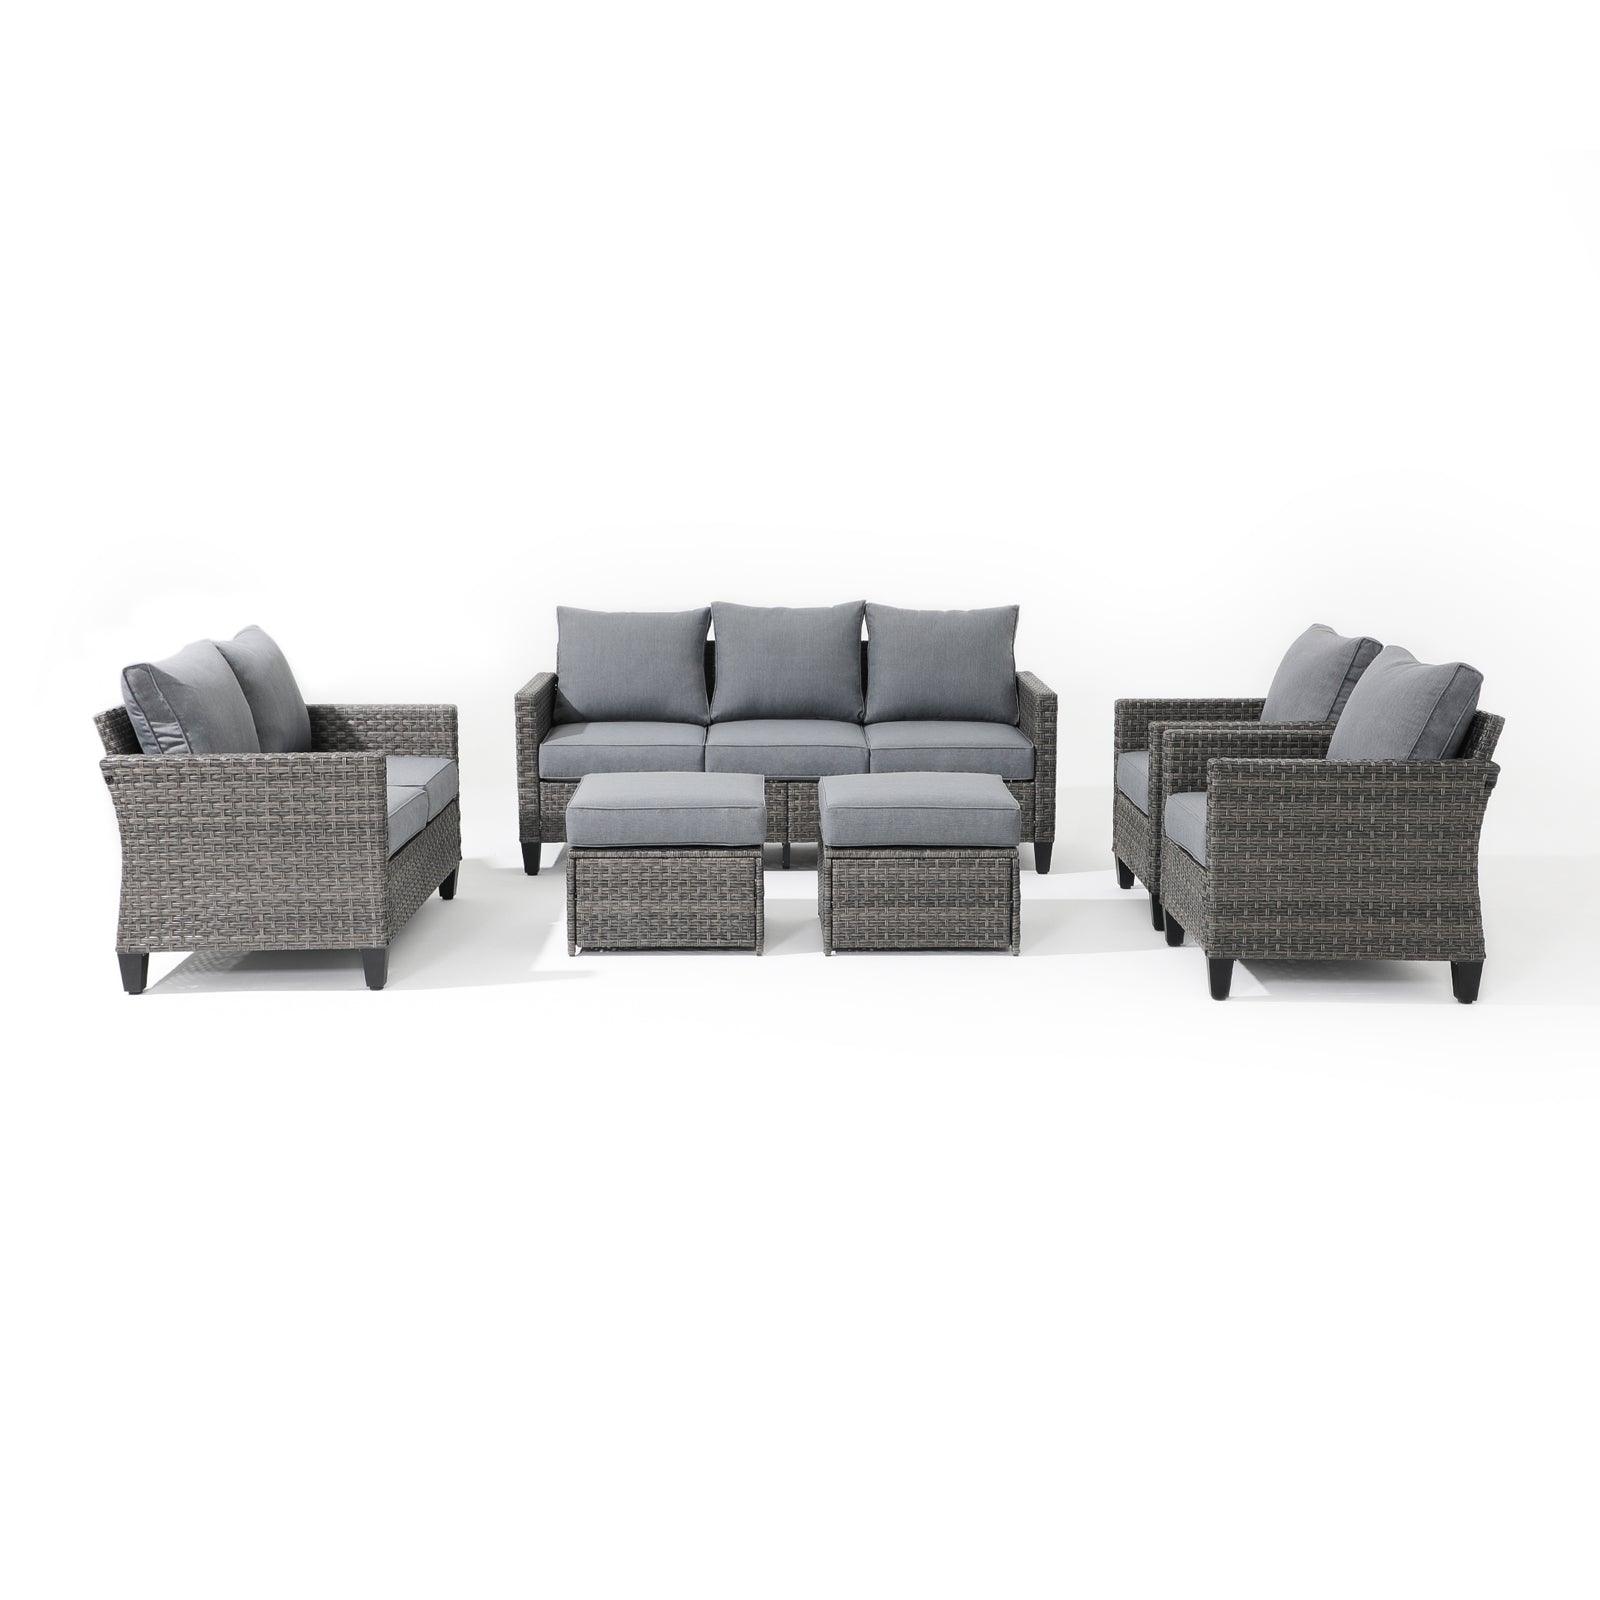 Ayia 6-Piece Grey outdoor Sofa Set with grey cushions, a 3-seater sofa, 2 arm chairs , 2 ottomans, 1 loveseat- Jardina Furniture #color_Grey#piece_6-pc. with ottomans